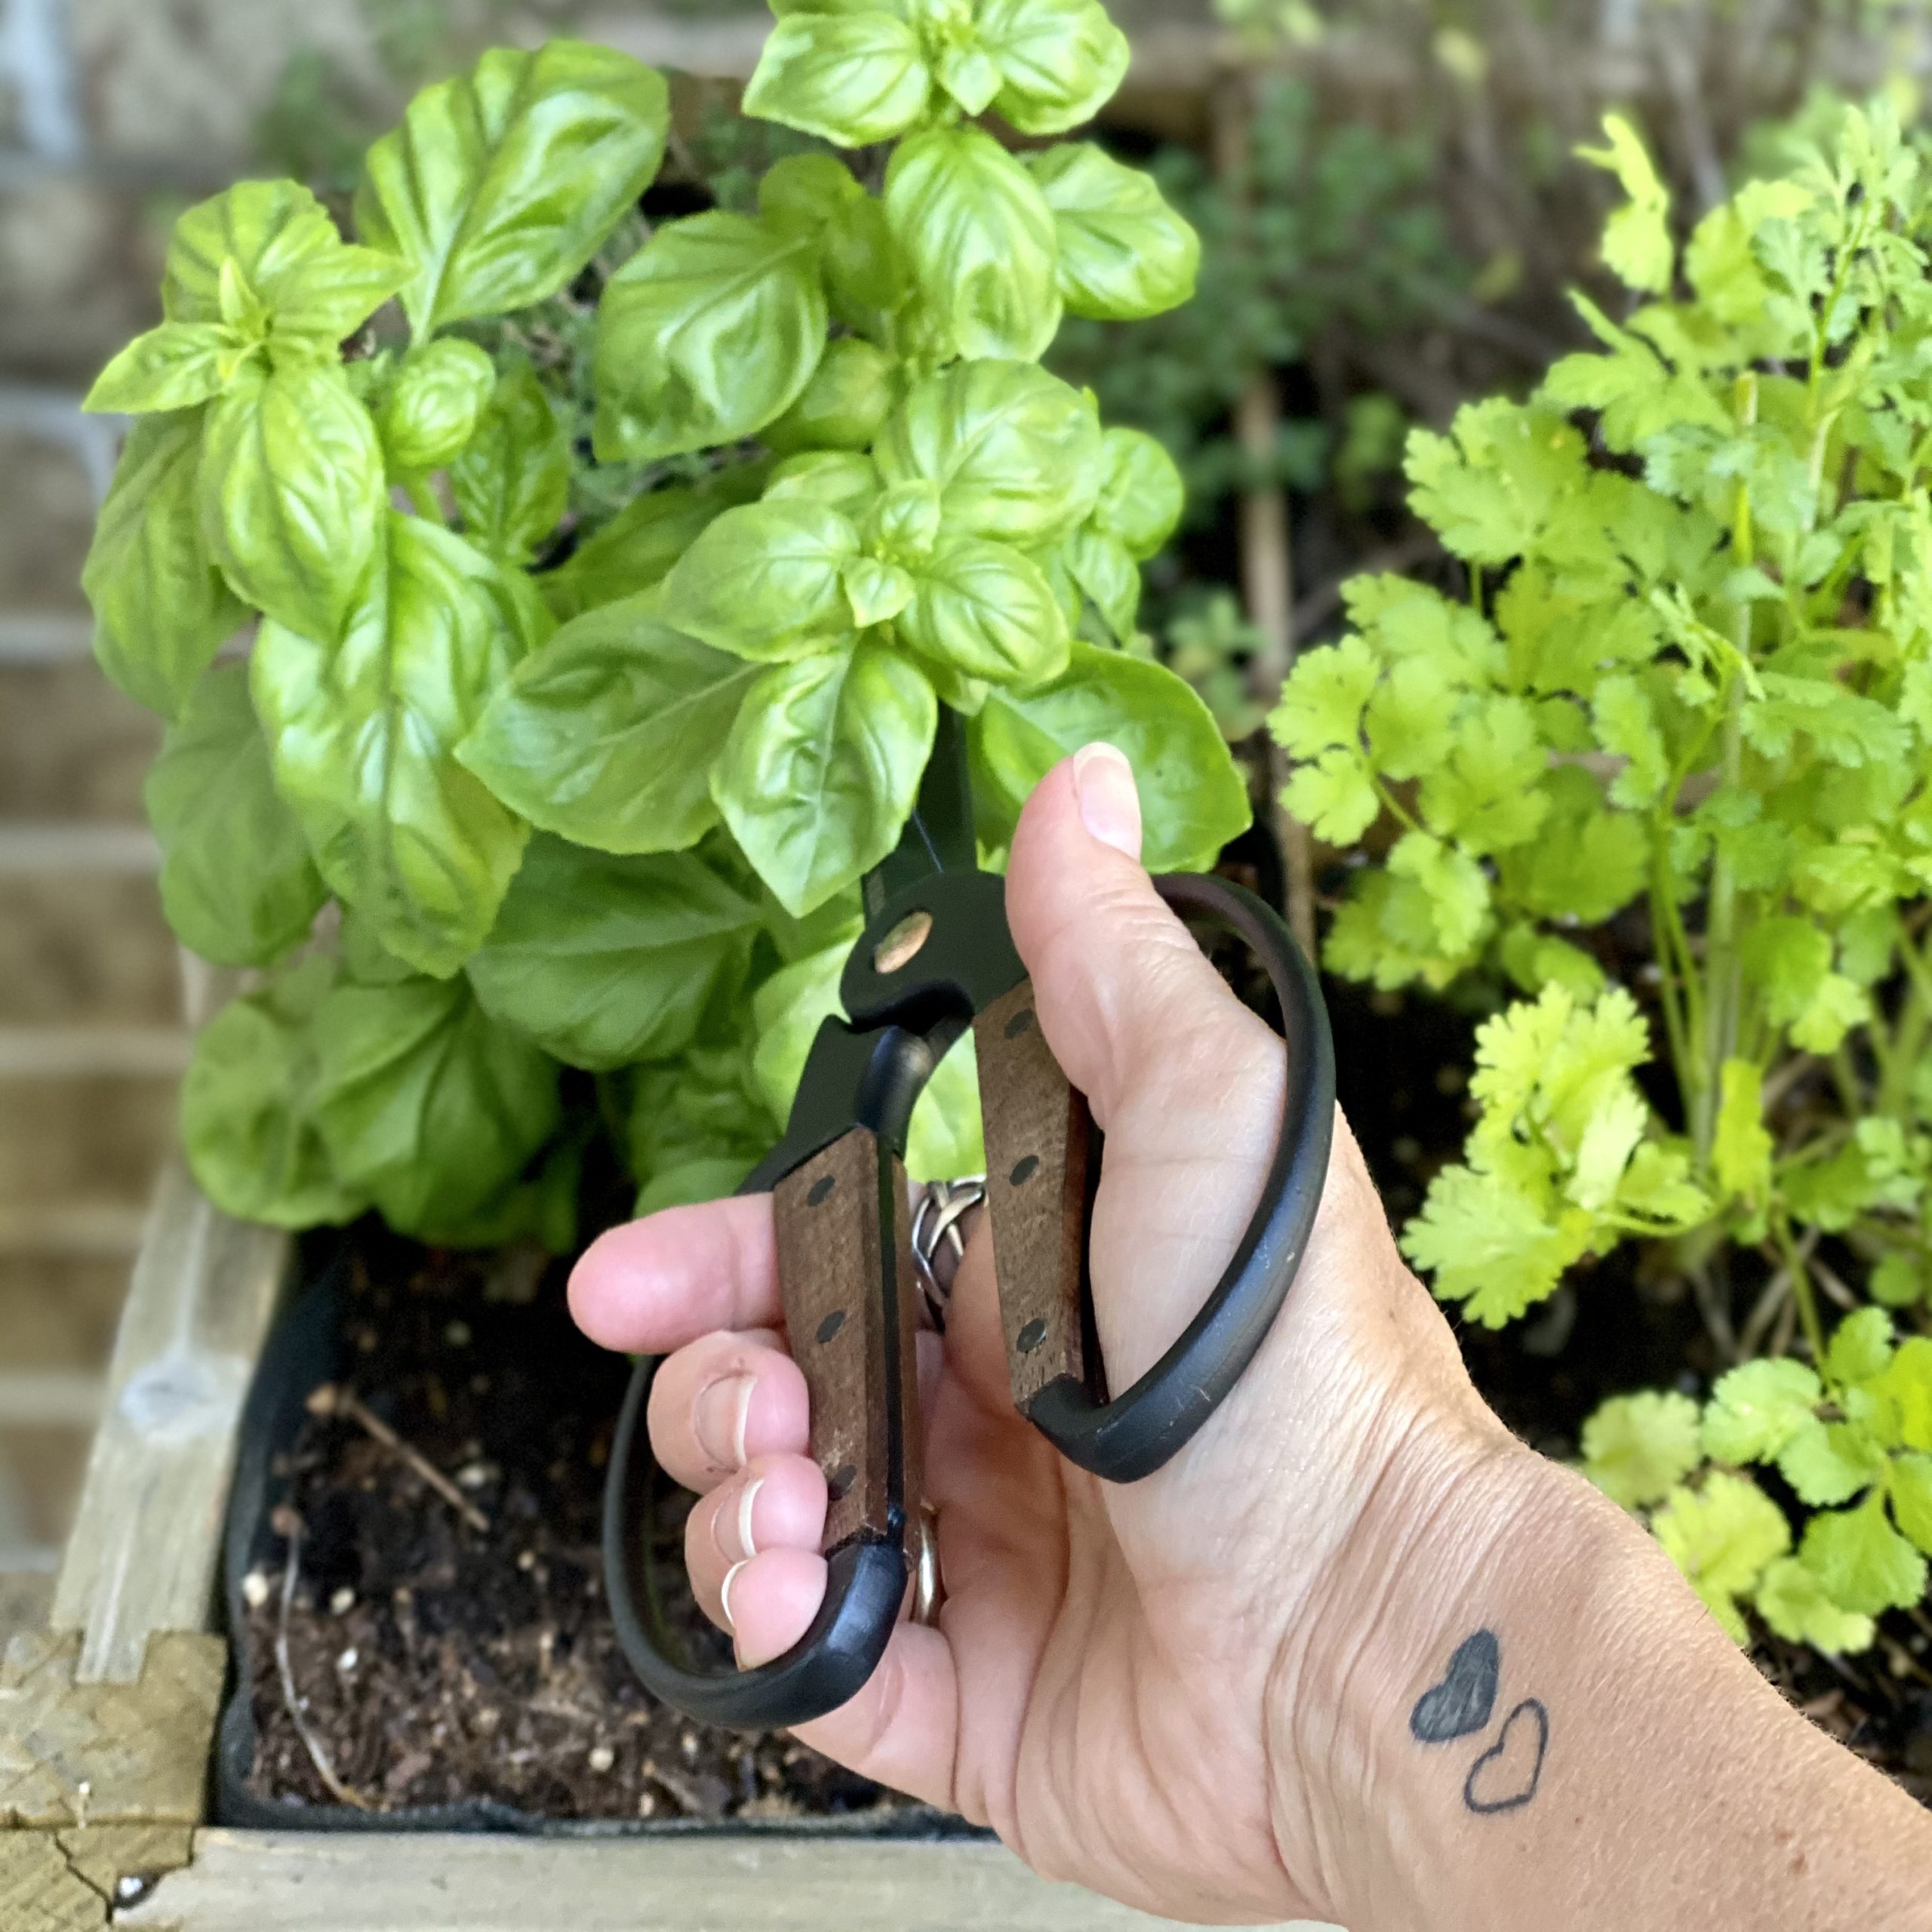 Cutting basil from the herb table.